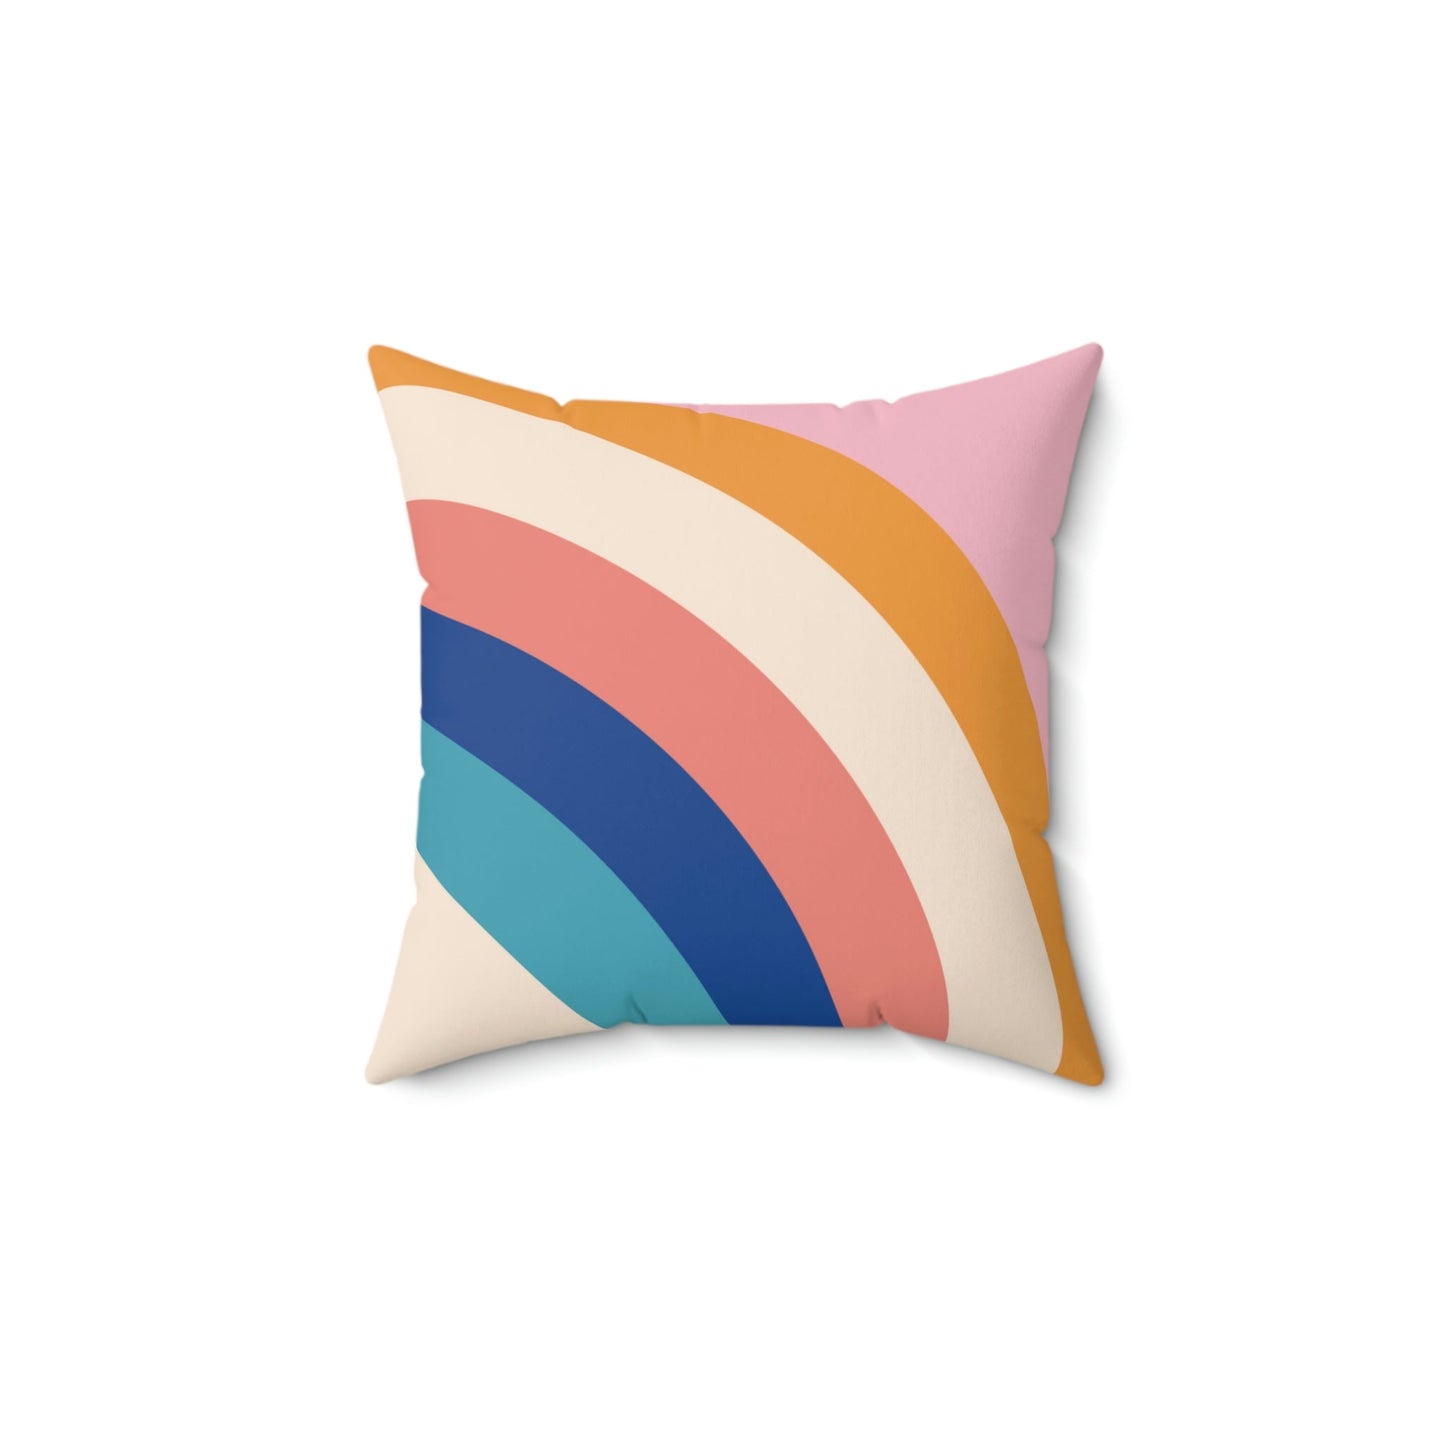 Rainbow Accent Square Pillow Home Decor Pink Sweetheart